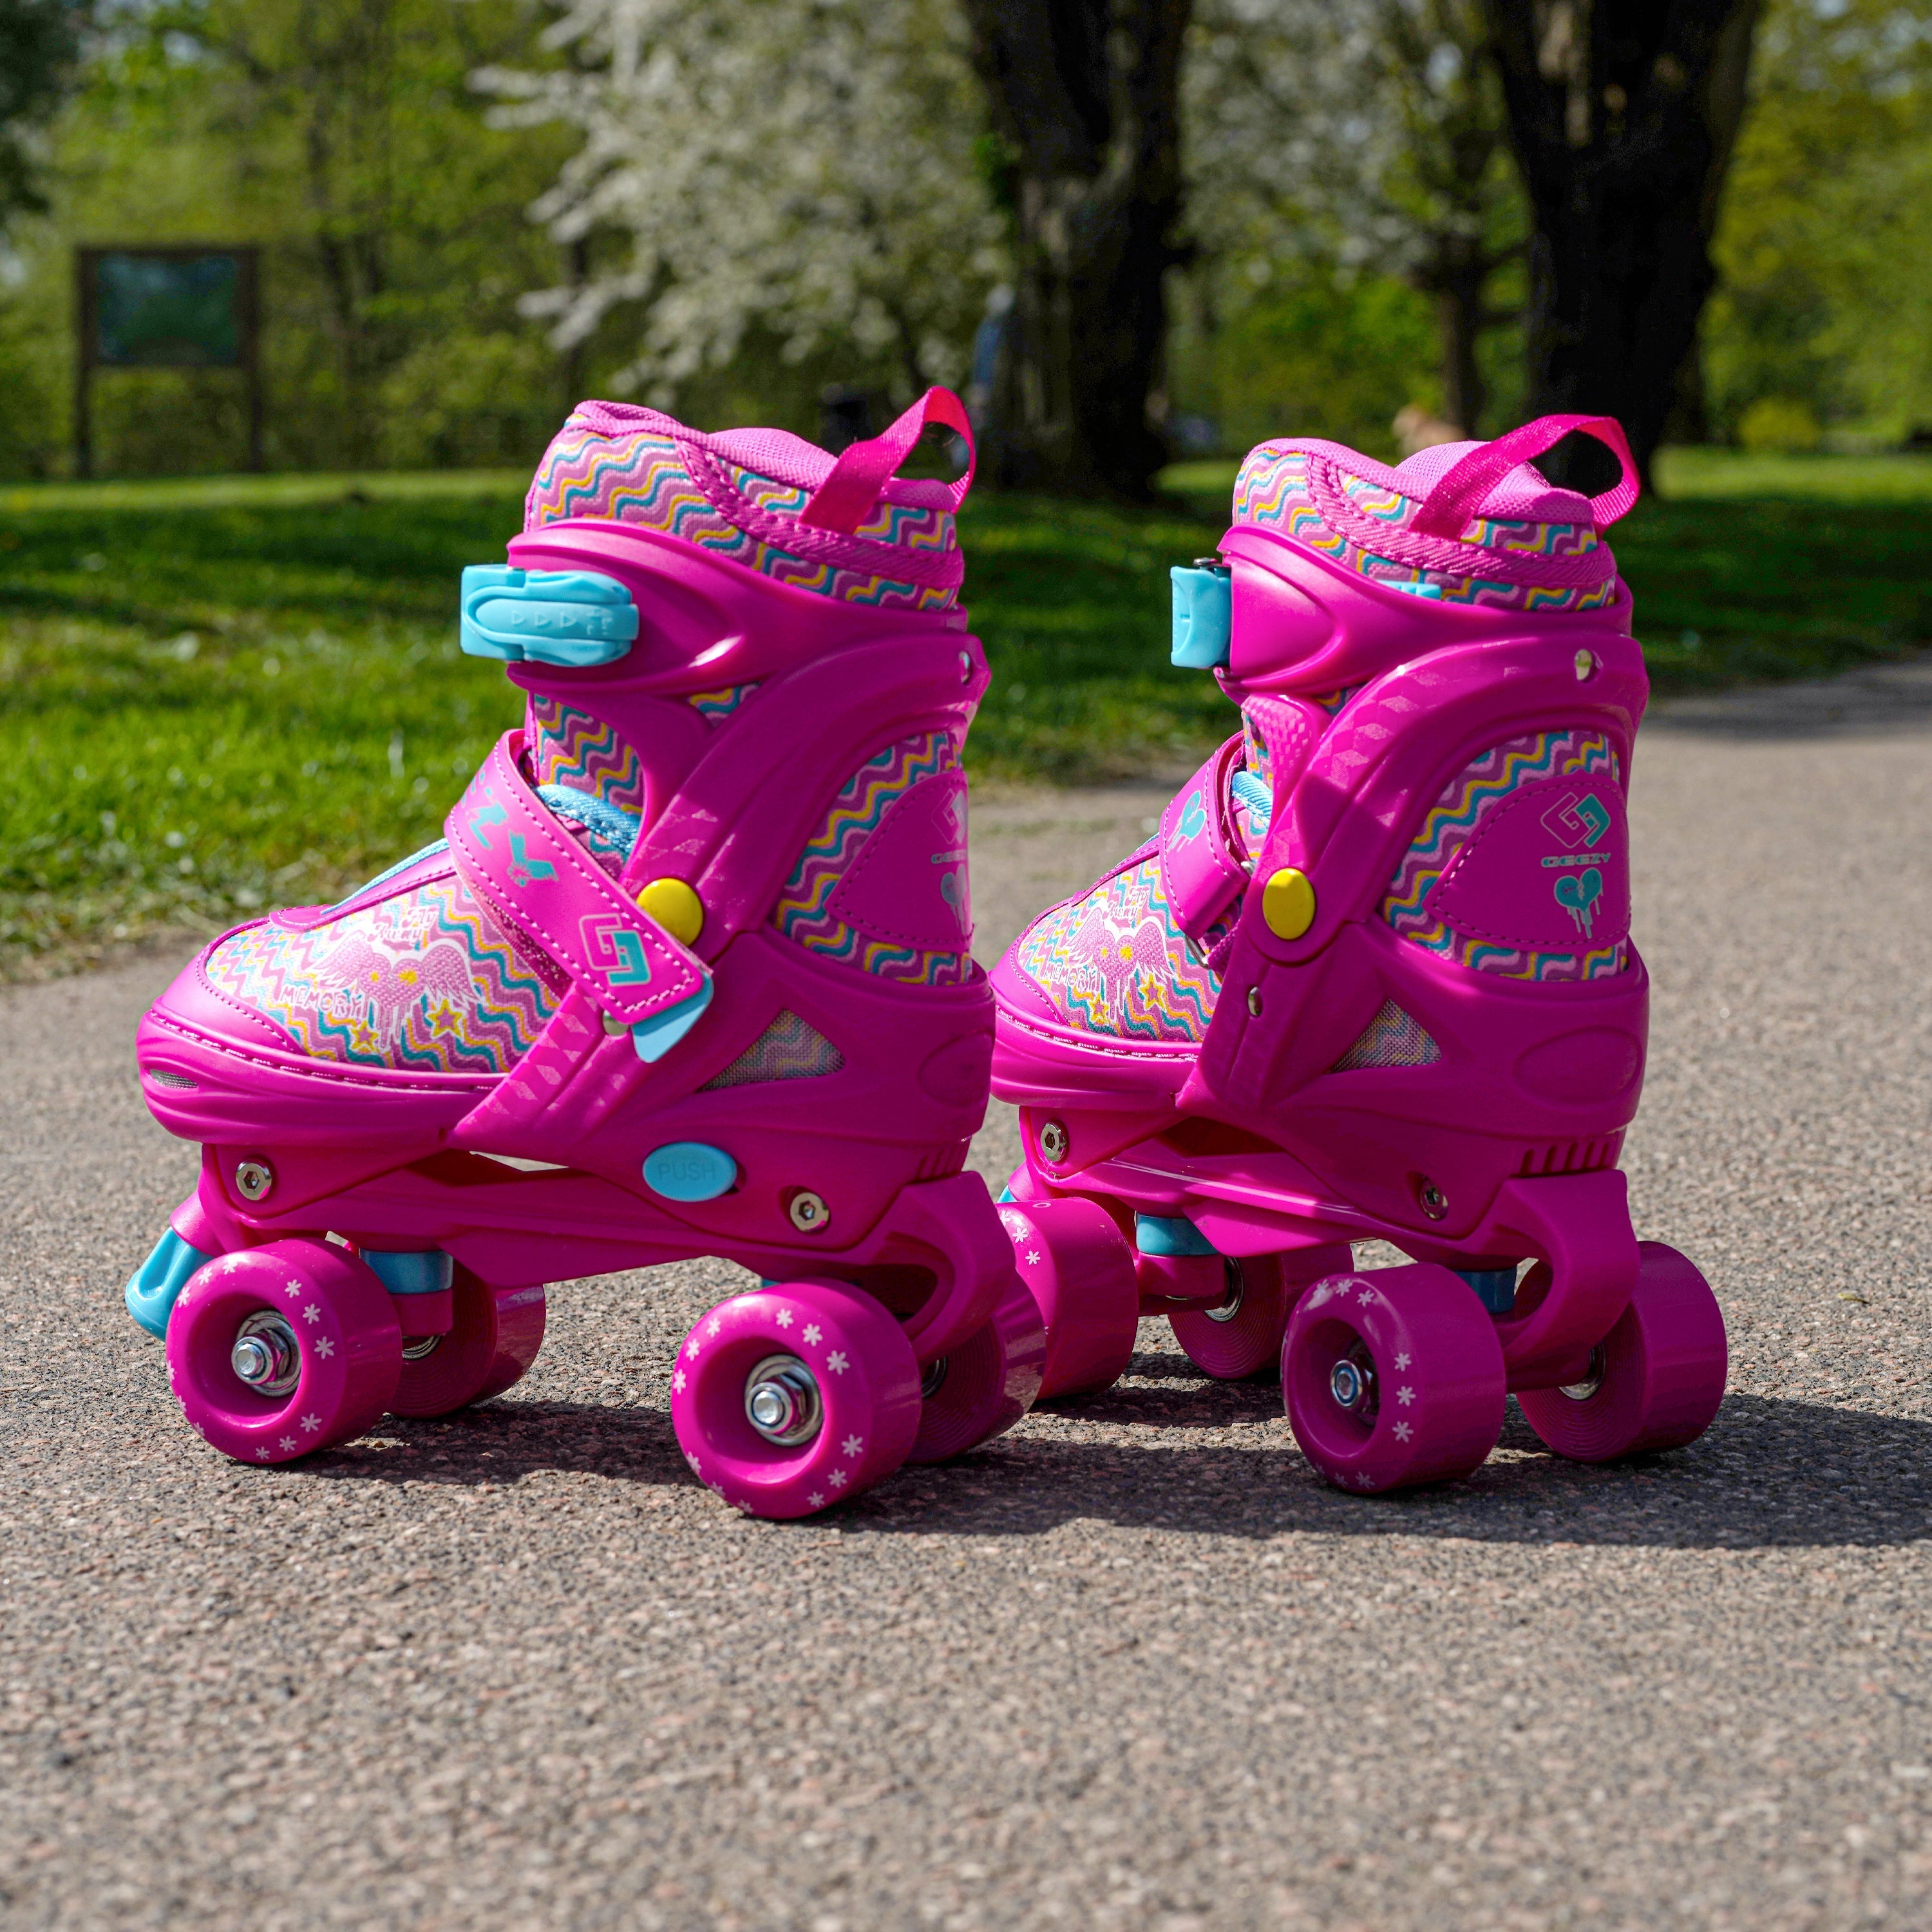 Pink Roller Skates for Kids with 4 Wheel Adjustable Sizes The Magic Toy Shop - The Magic Toy Shop